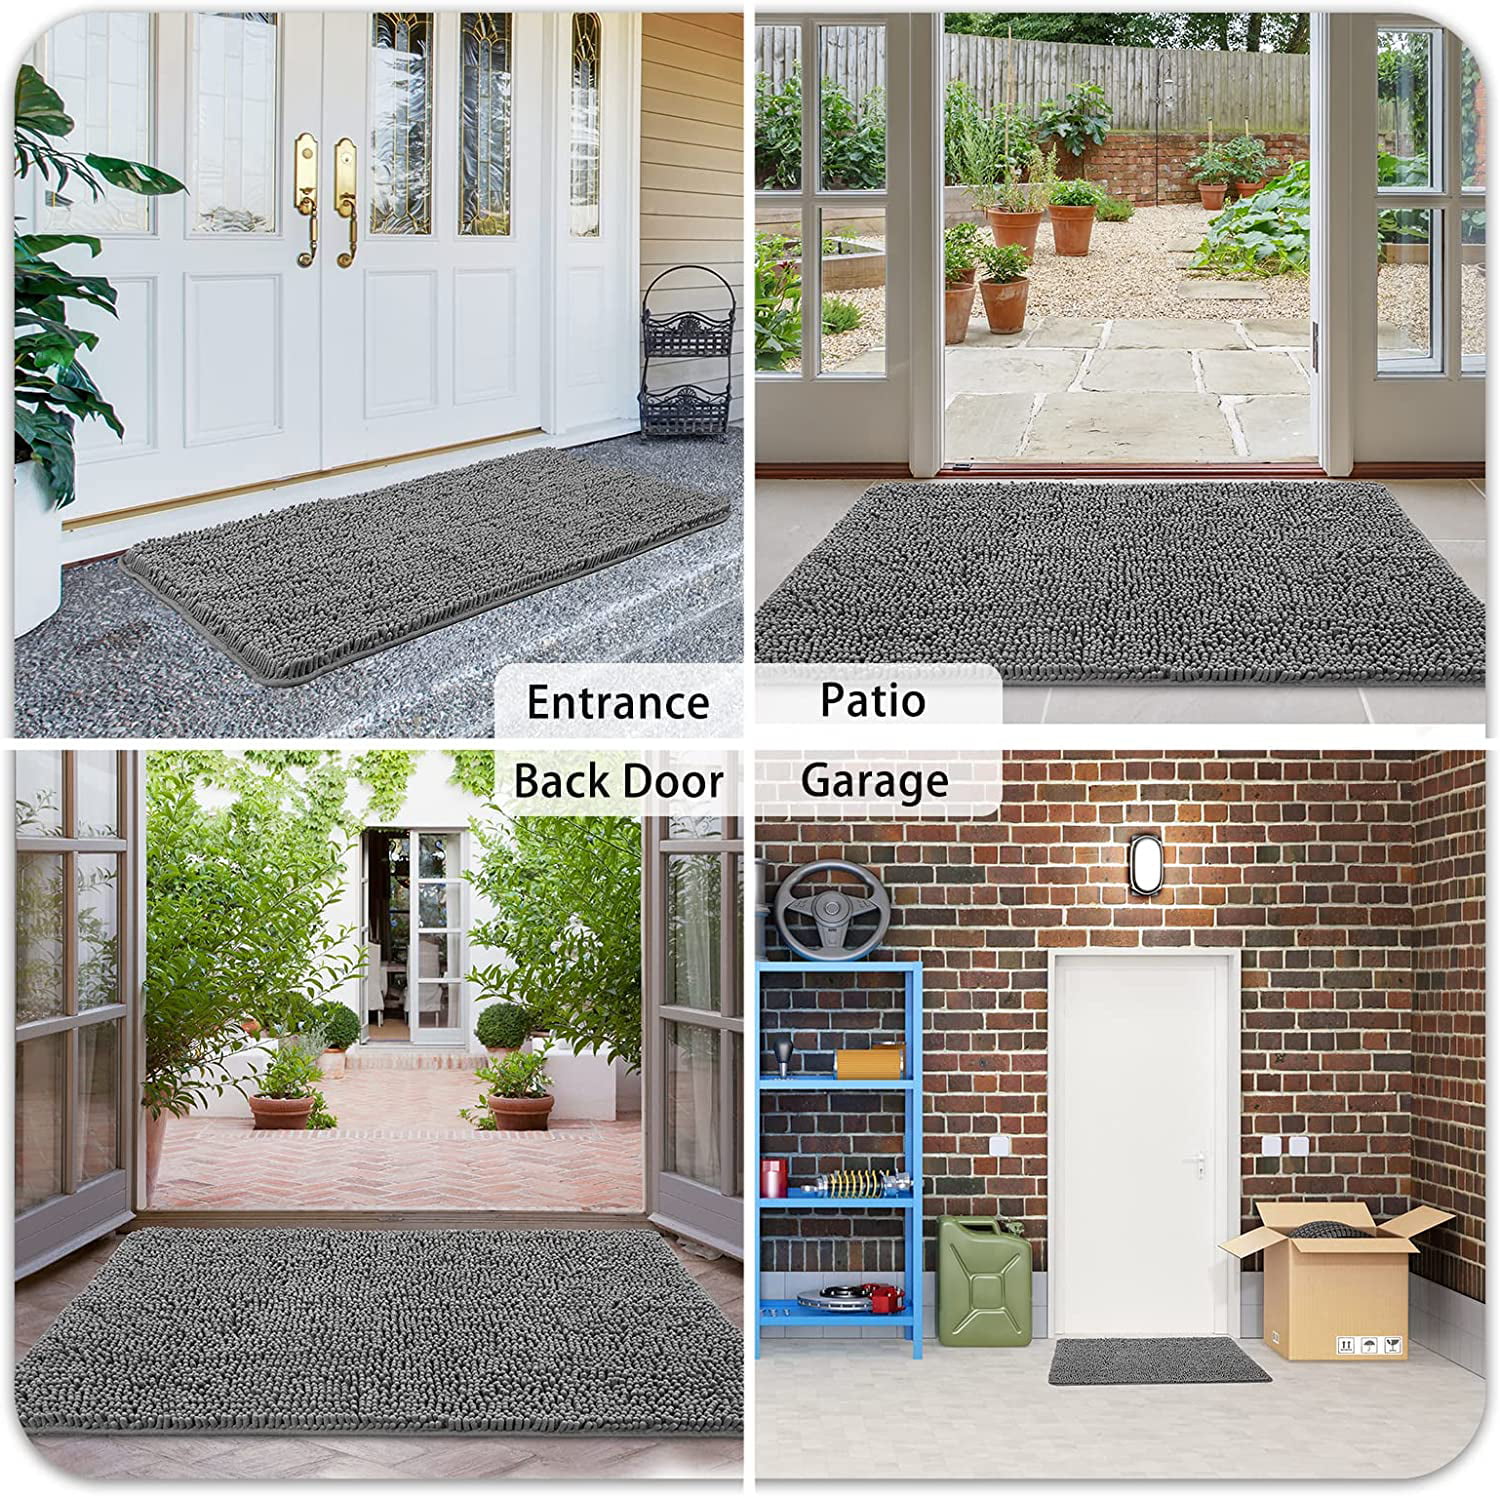  Ompaa Door Mat Indoor Rugs for Entryway, 32x20 Grey, Dog Rugs  for Muddy Paws Floors Mat, Super Absorbent Non-Slip Washable Dirt Trapper,  Inside Entry Rugs for Entrance, Patio, Garage : Home